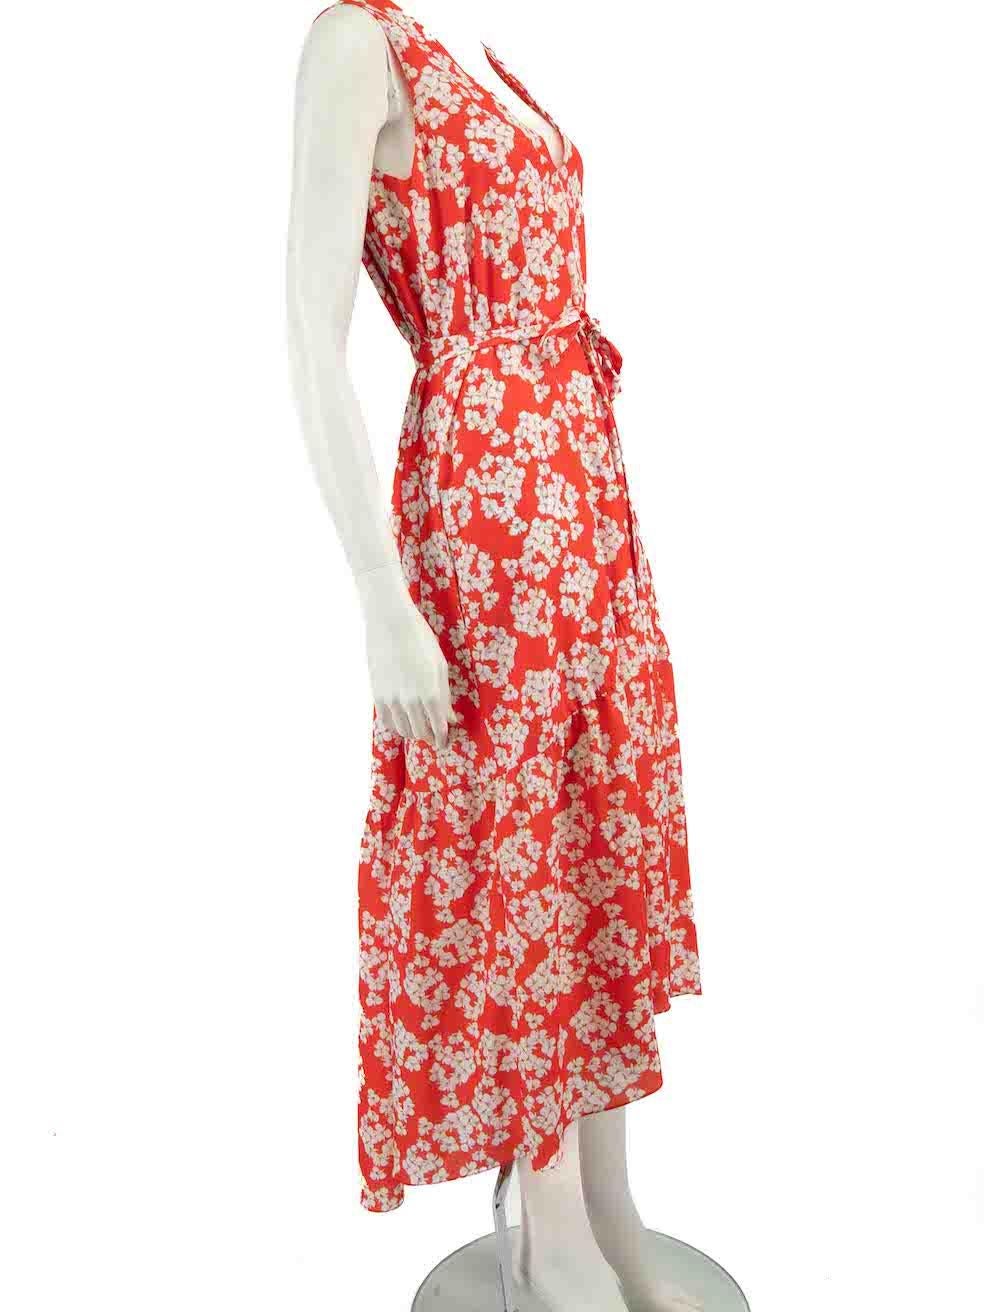 CONDITION is Good. Minor wear to dress is evident. Light wear with discolouration mark to front and left side of skirt on this used Borgo De Nor designer resale item.
 
 Details
 Red
 Polyester
 Dress
 Floral pattern
 Midi
 V-neck
 Sleeveless
 2x